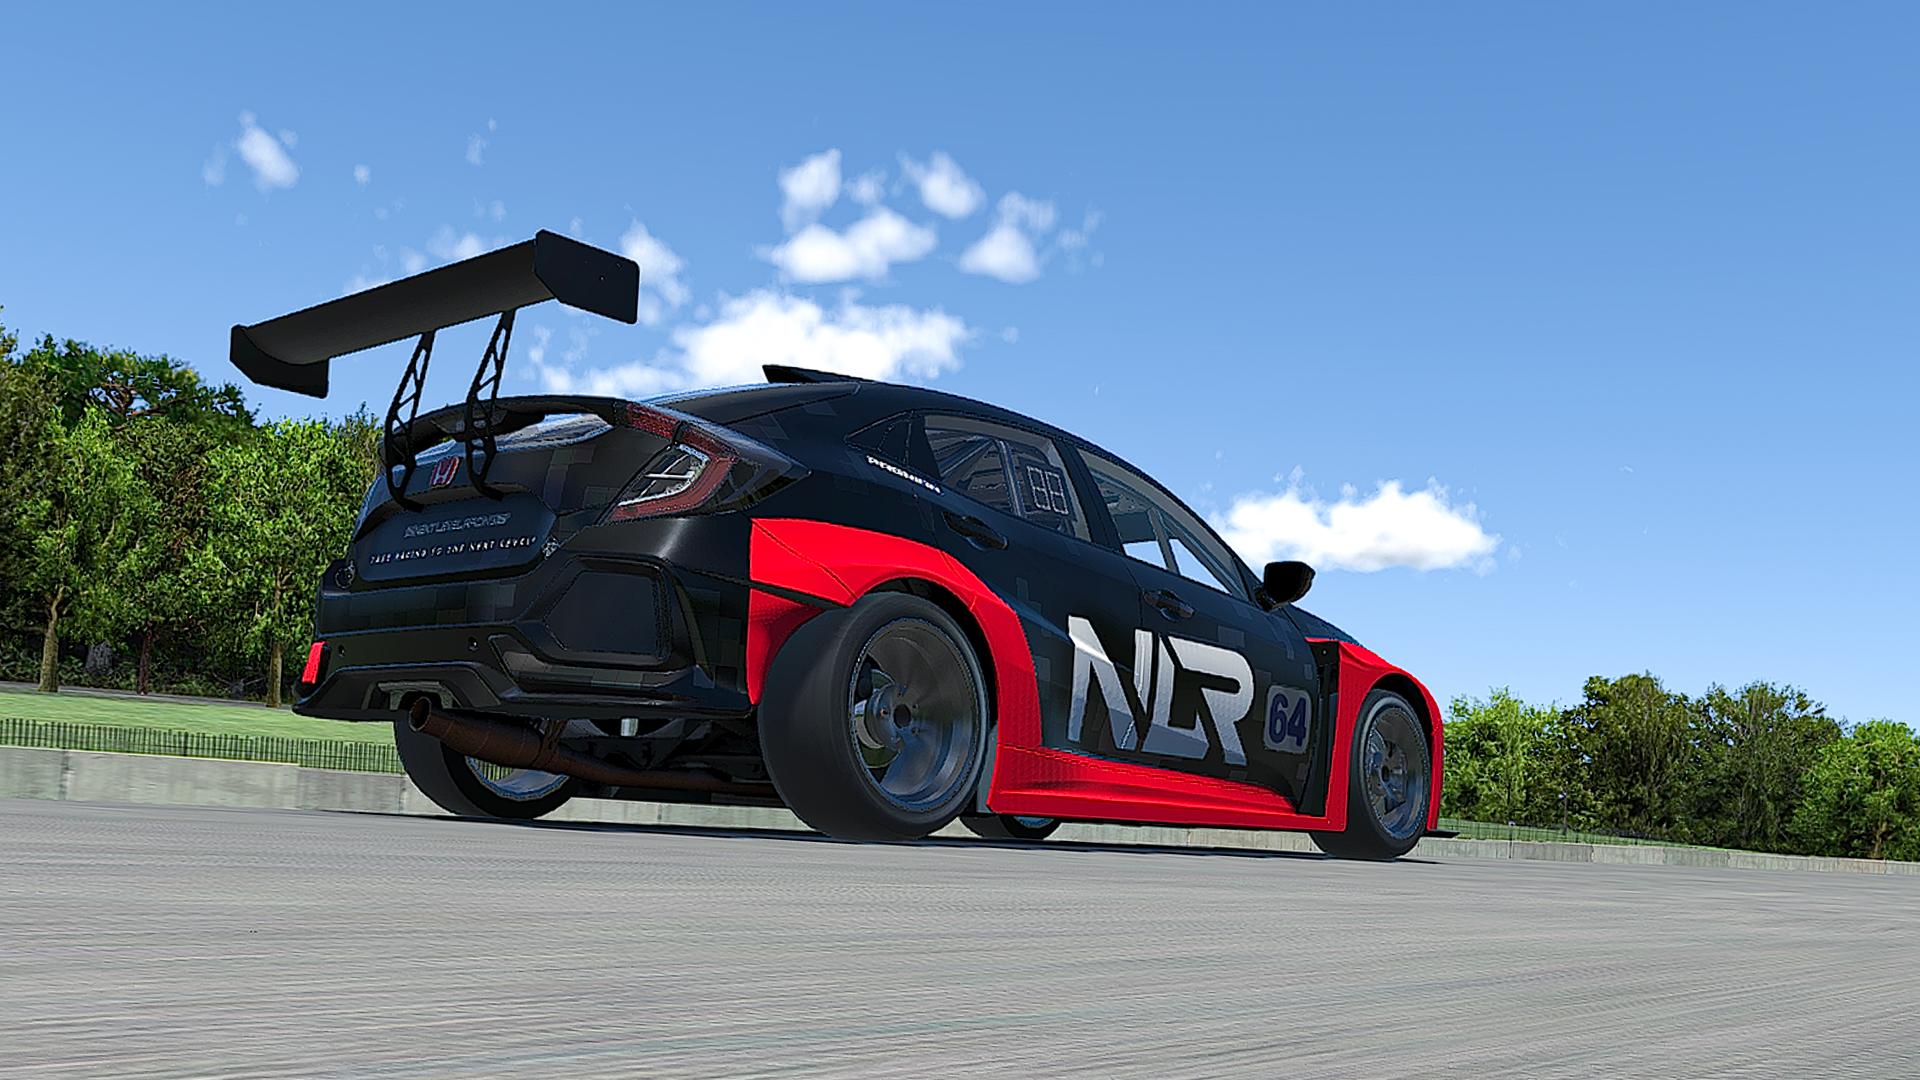 Preview of Next Level Racing 2023 Honda Civic Type R by Brendan Harris